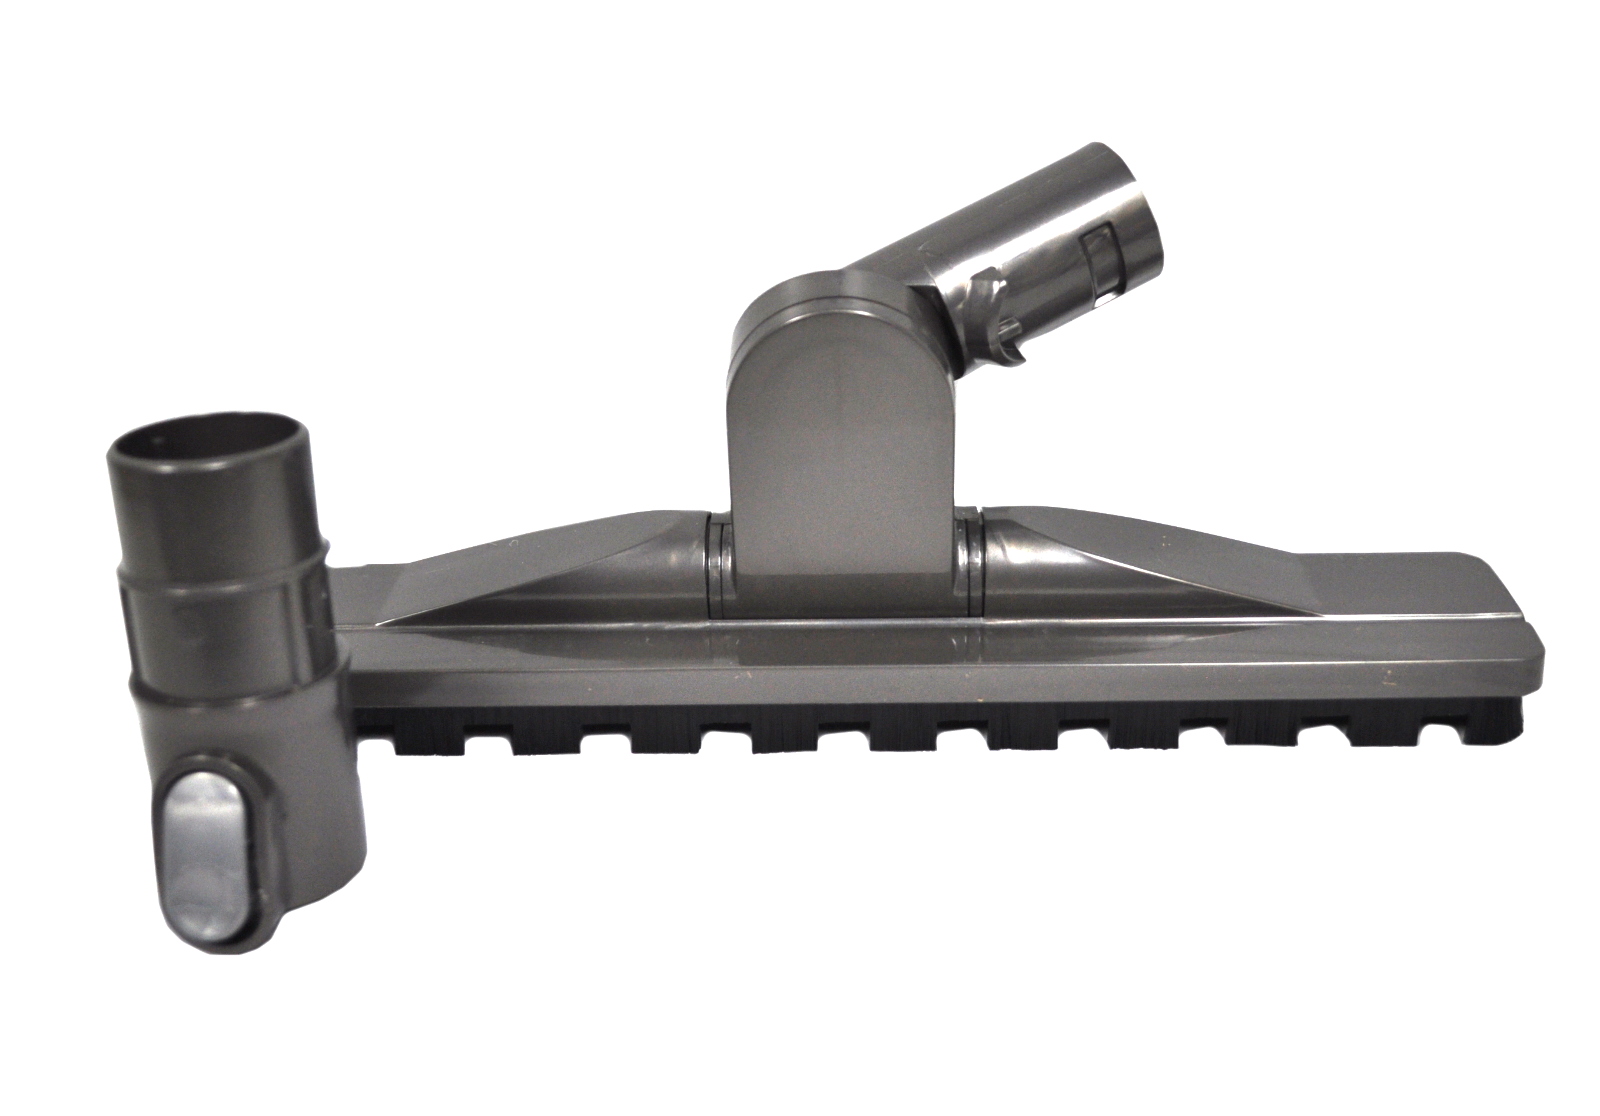 4 Your Home Articulating Hardwood Floor Tool With Adaptor Designed To Fit Various Dyson Vacuums